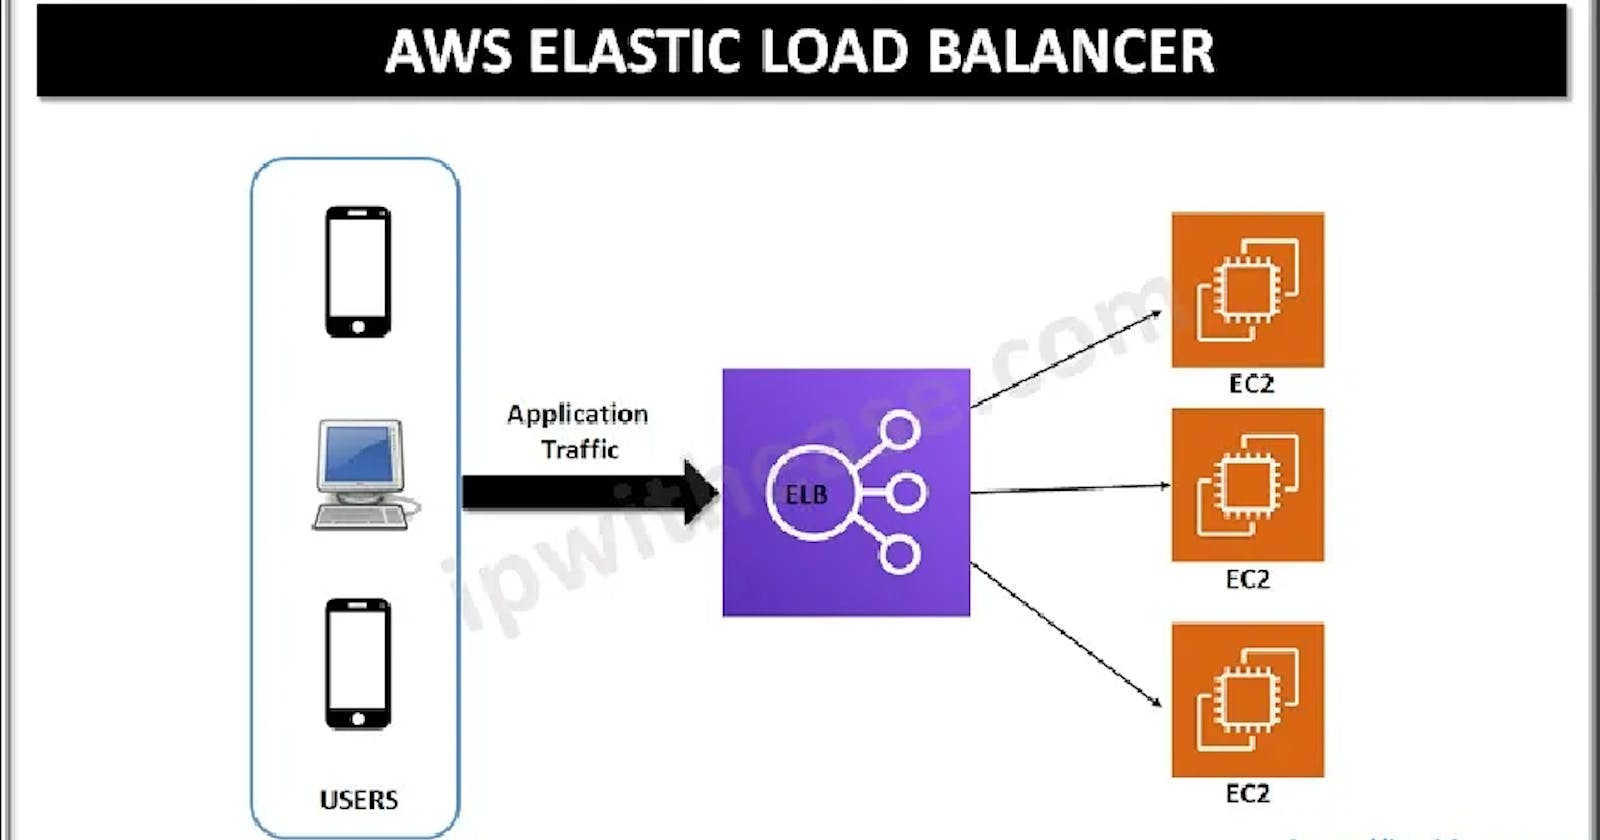 Setting up an Application Load Balancer with AWS EC2 automated environment